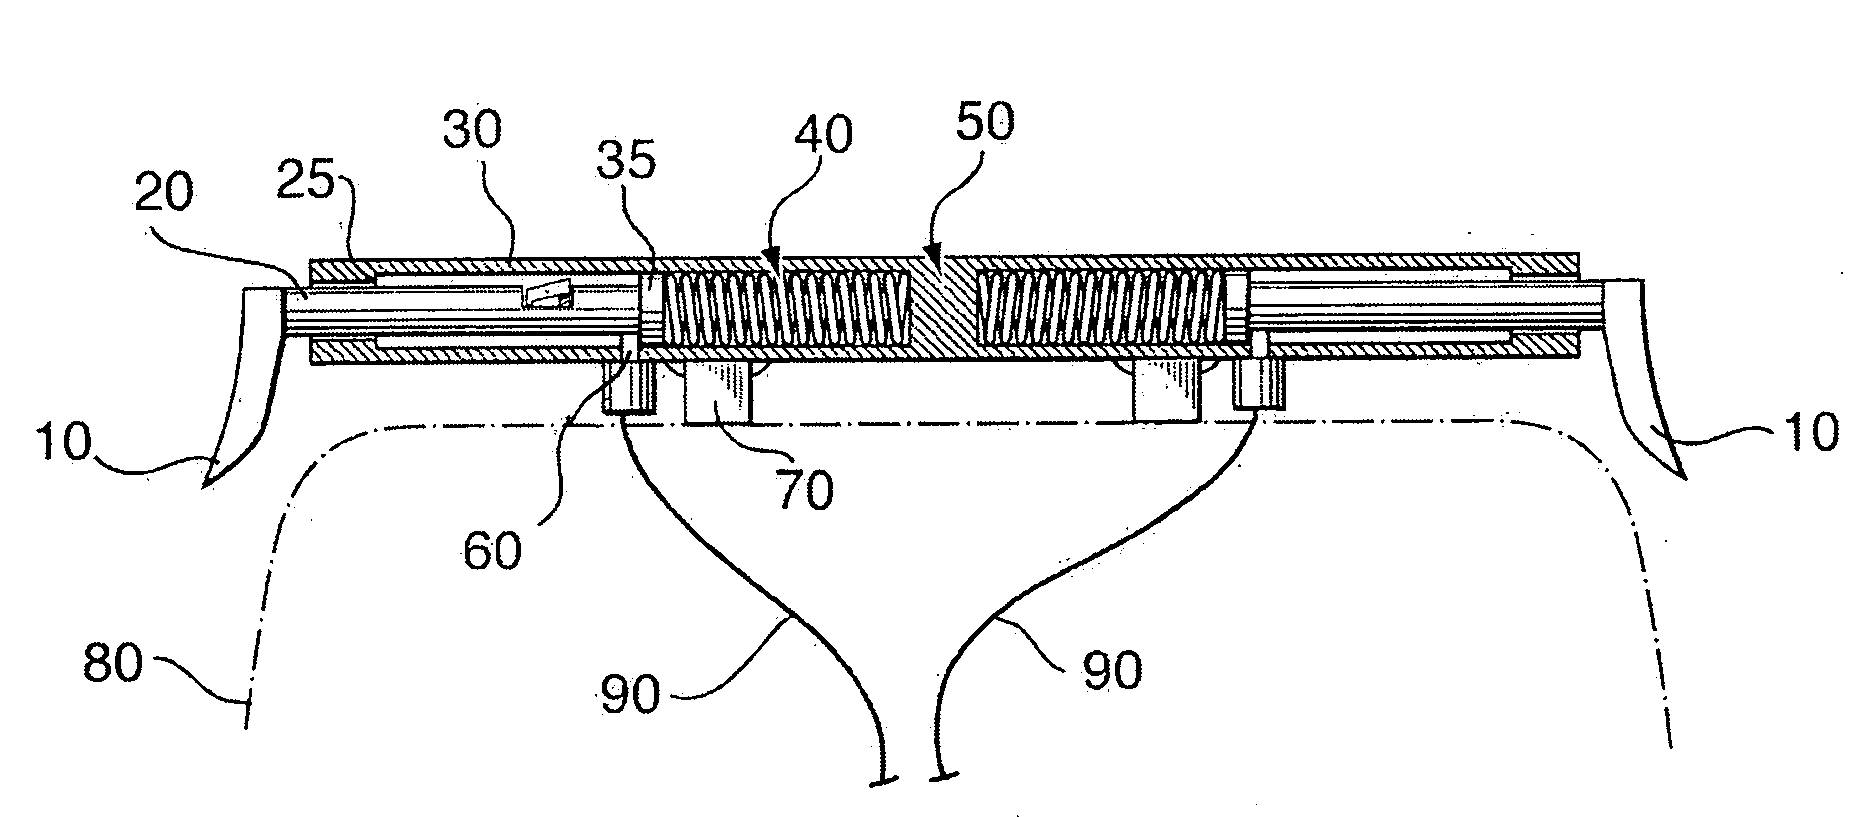 Vehicle capture and restraint device